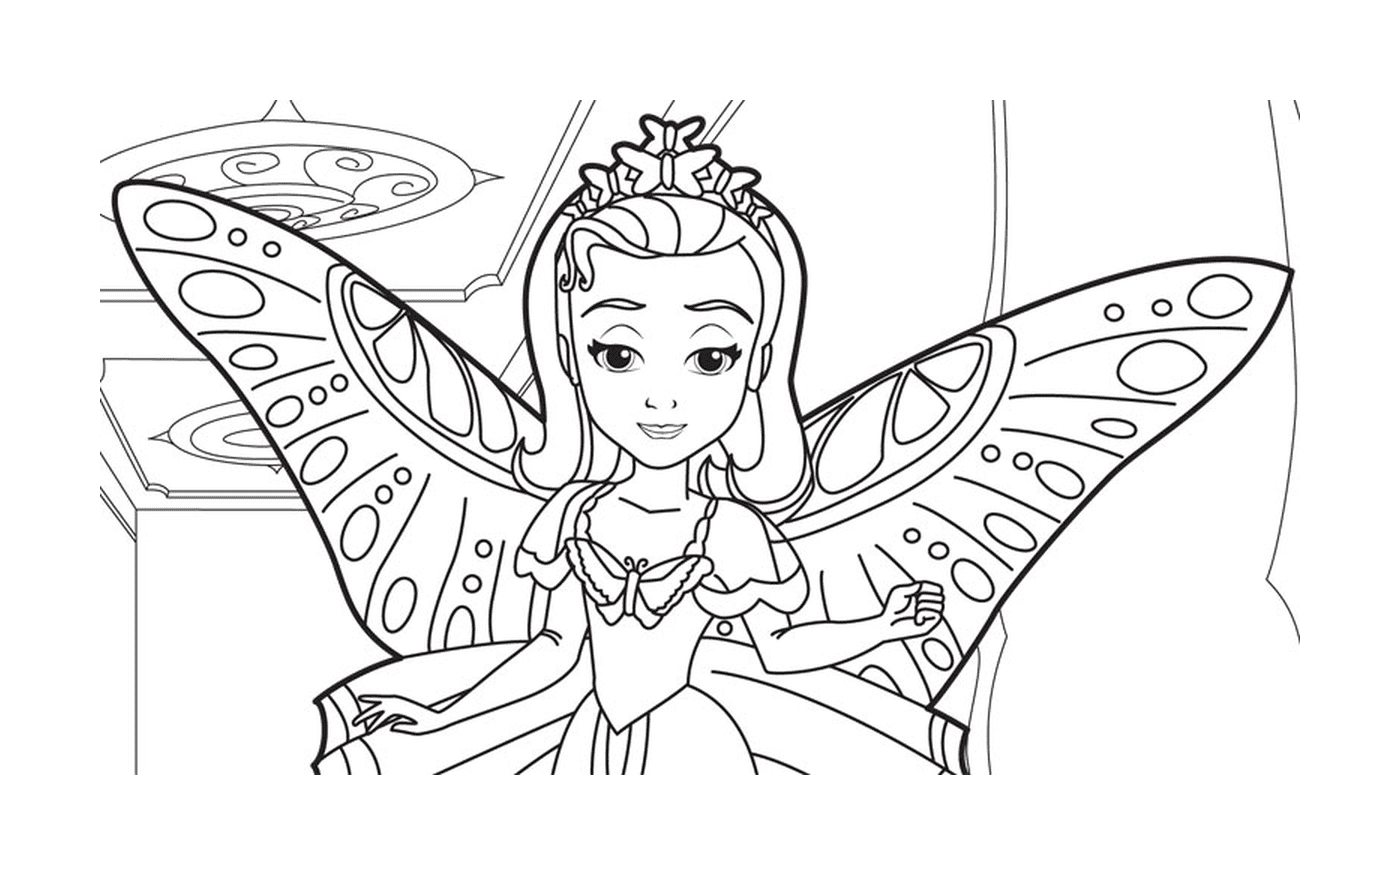  Princess Disney with colorful wings 